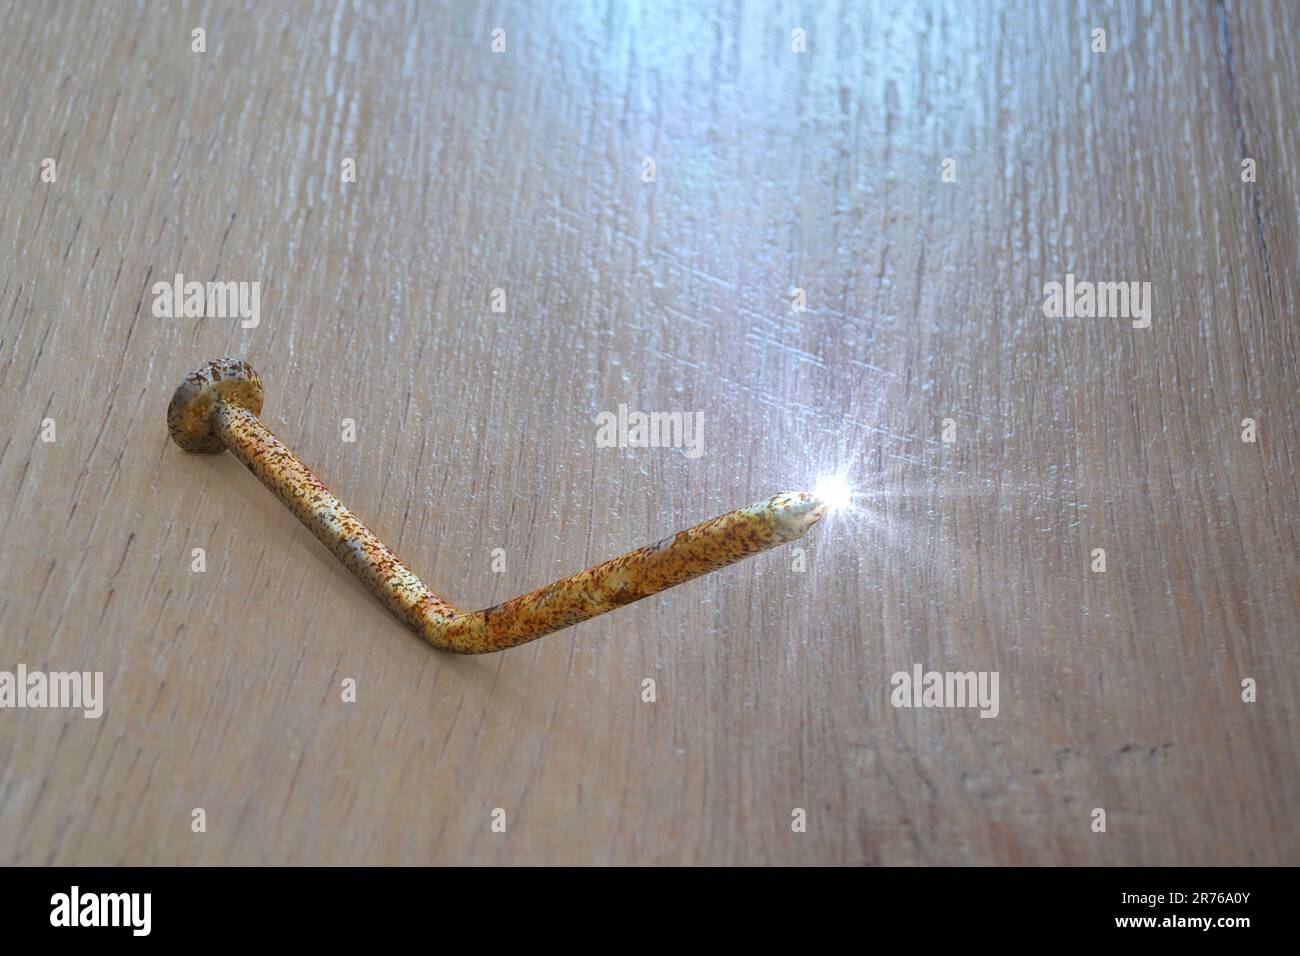 Rusty old bent metal nail, computer illustration. Old nails and other dirty objects are potential source of tetanus bacteria transmitted by infected w Stock Photo